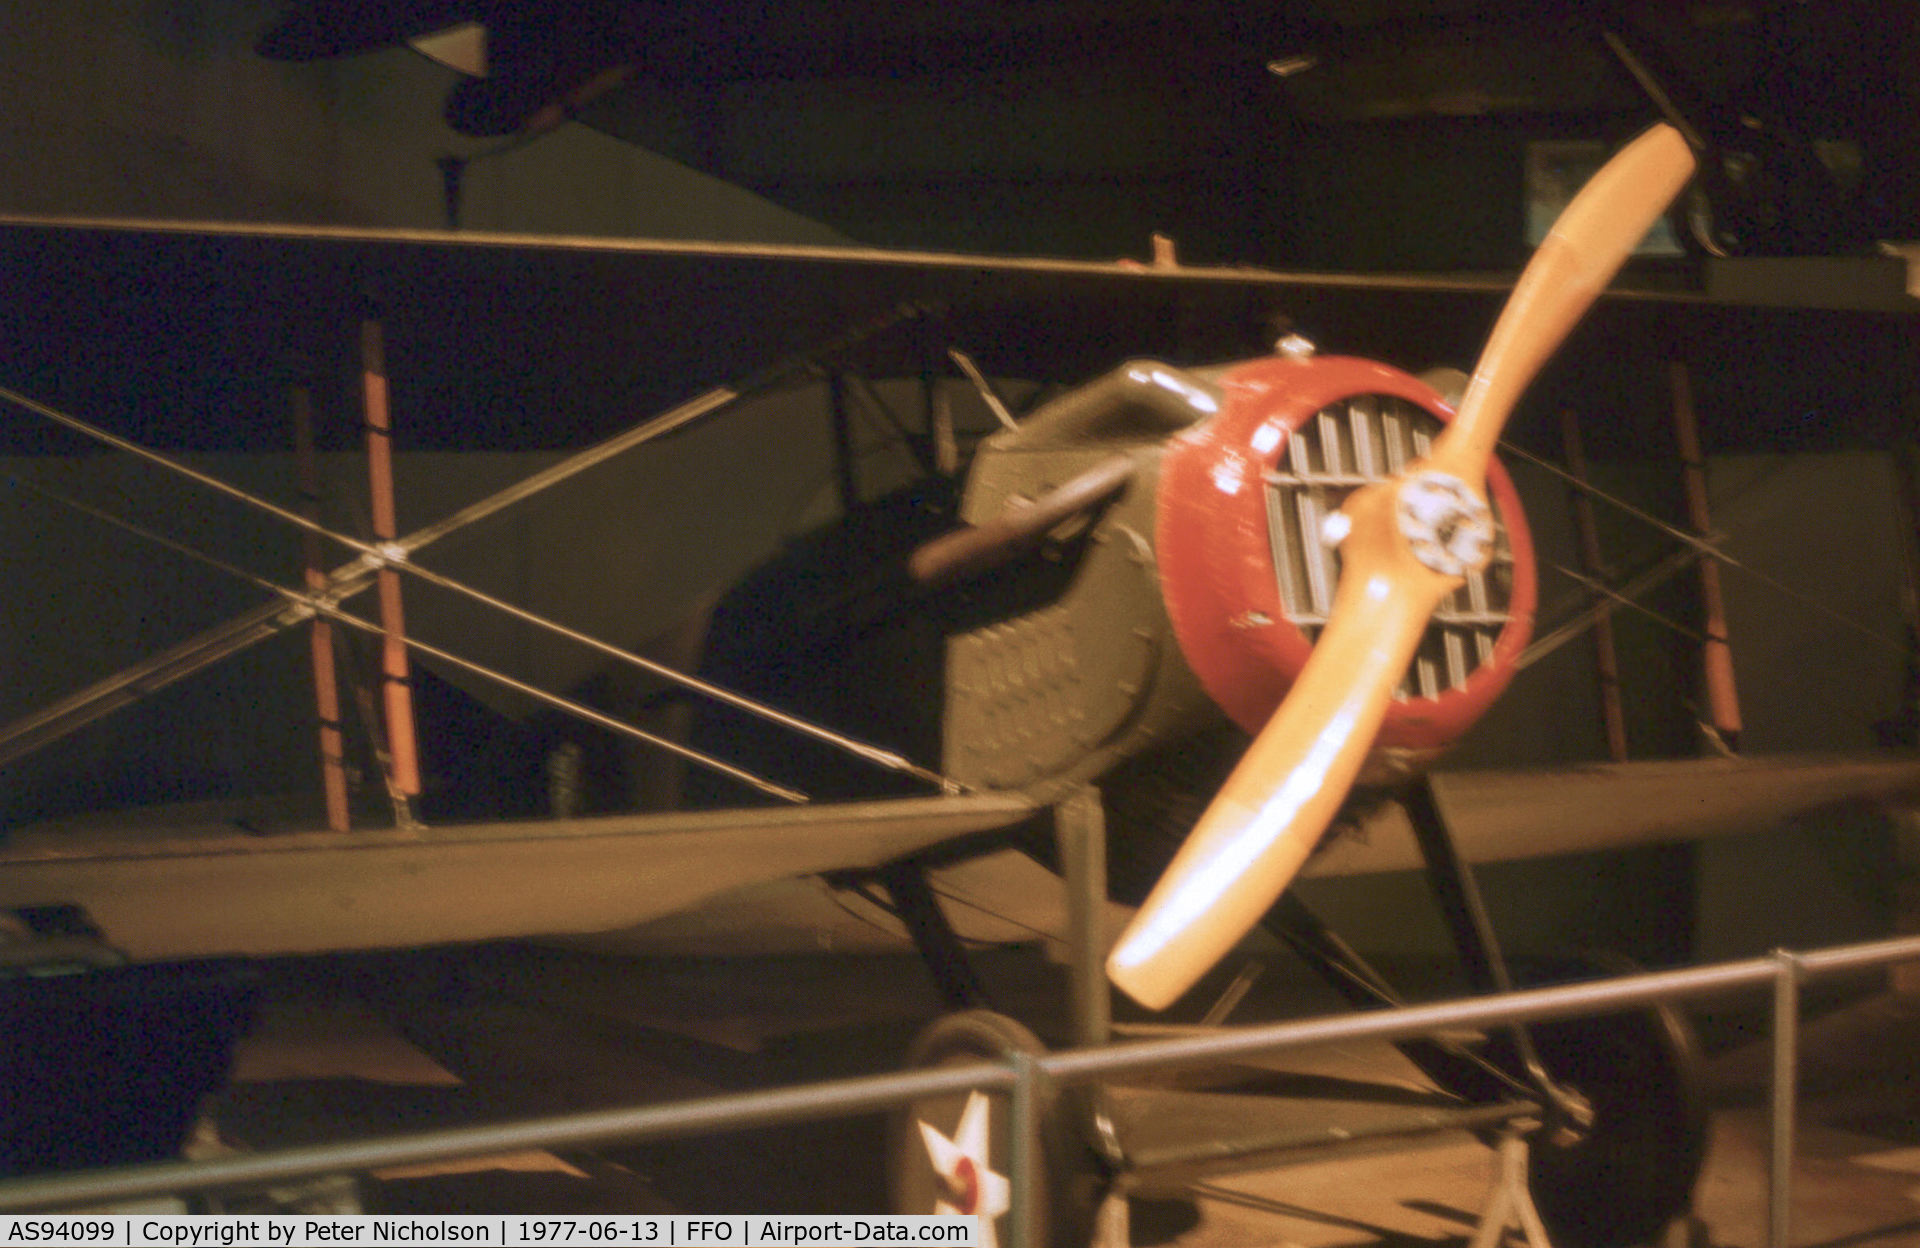 AS94099, SPAD S-VII C/N Not found AS94099, SPAD VII as displayed at the United States Air Force Museum in the Summer of 1977.